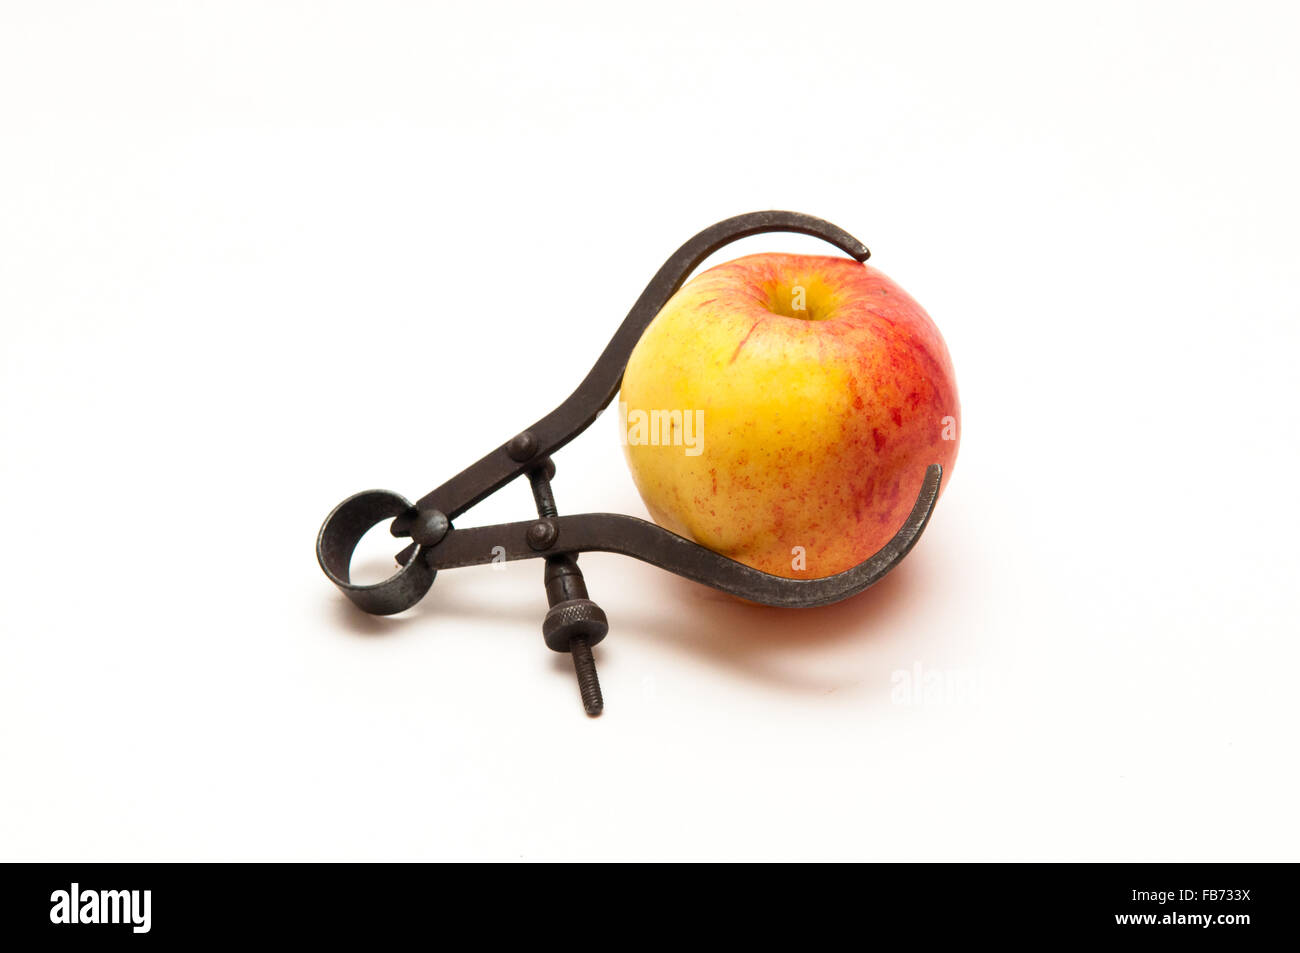 fresh apple being measured to represent weight loss Stock Photo